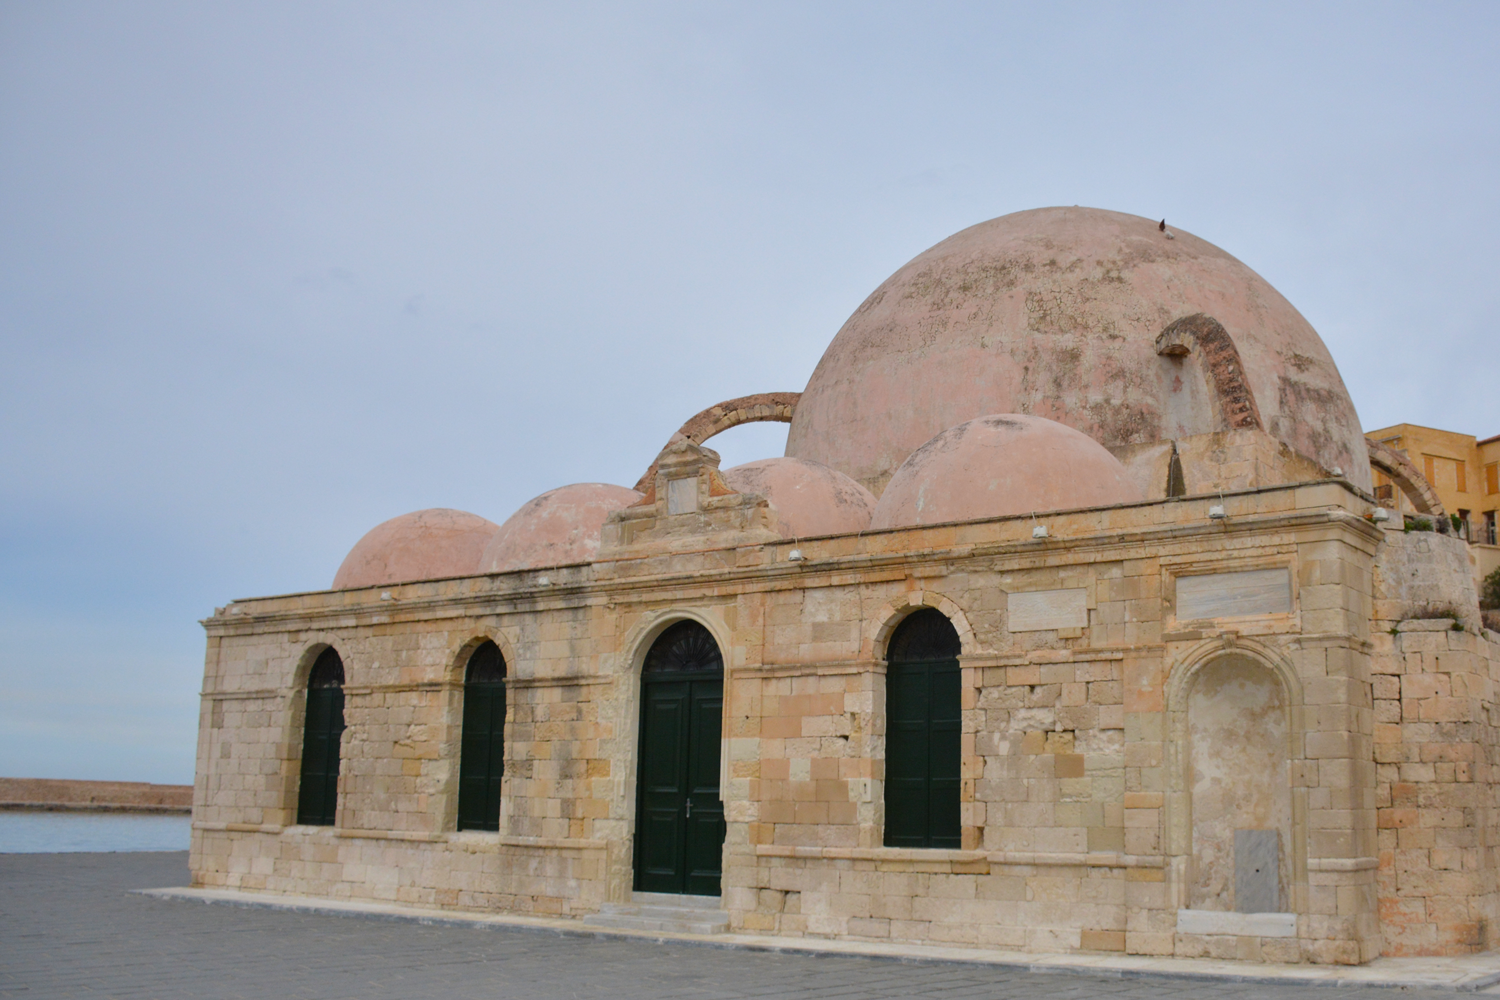 Yali Mosque, the mosque of the Venetian port of Chania - cretevantaxi.com